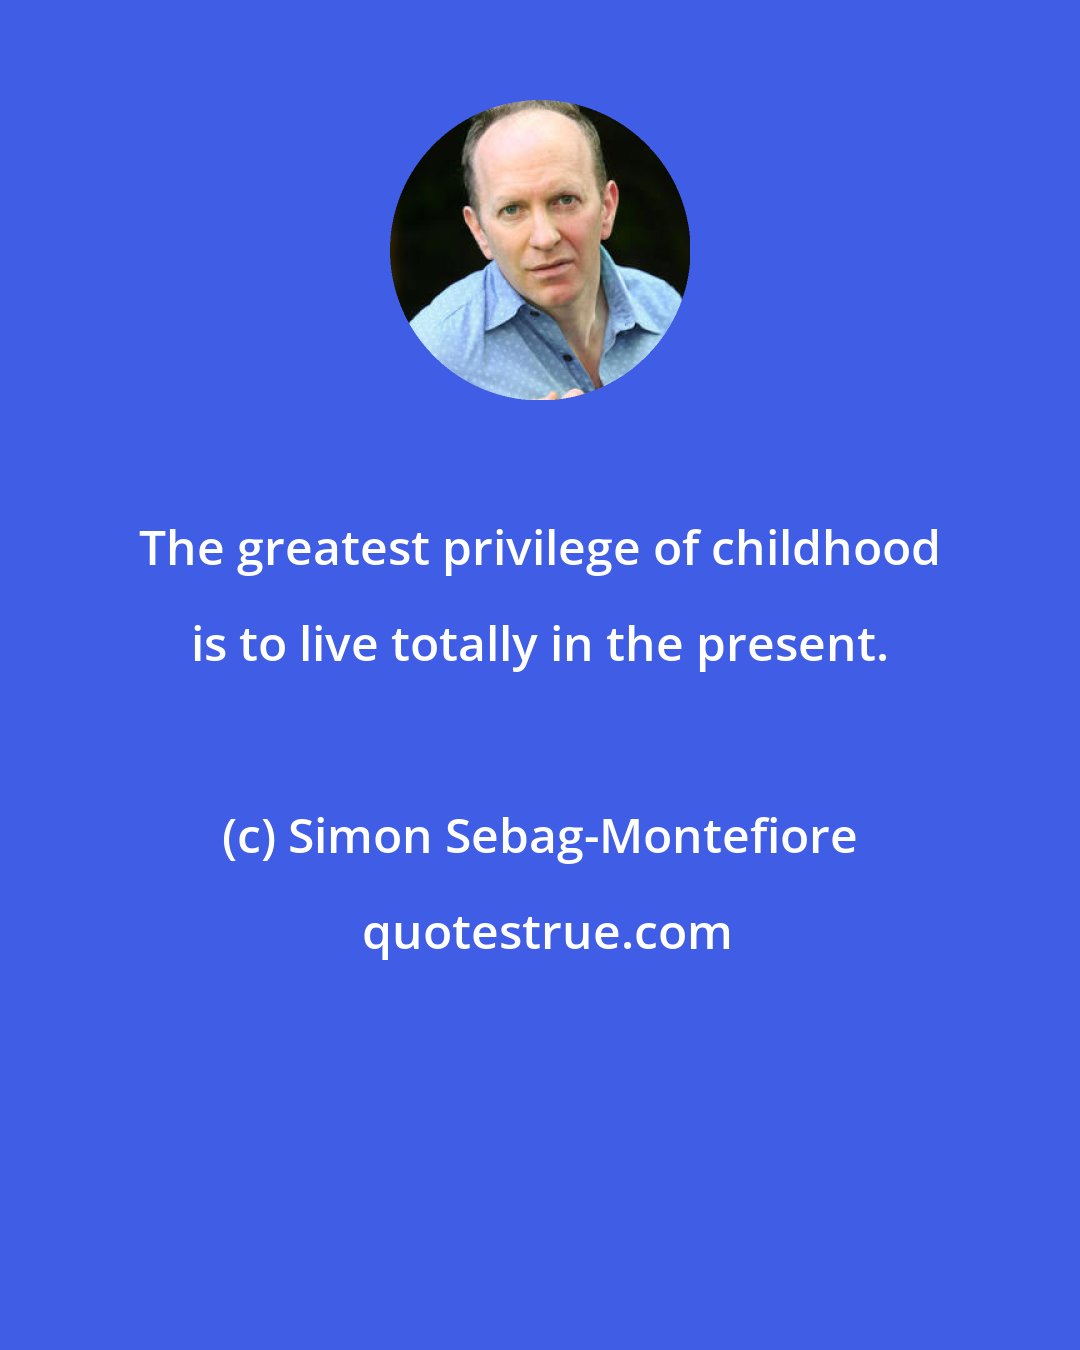 Simon Sebag-Montefiore: The greatest privilege of childhood is to live totally in the present.